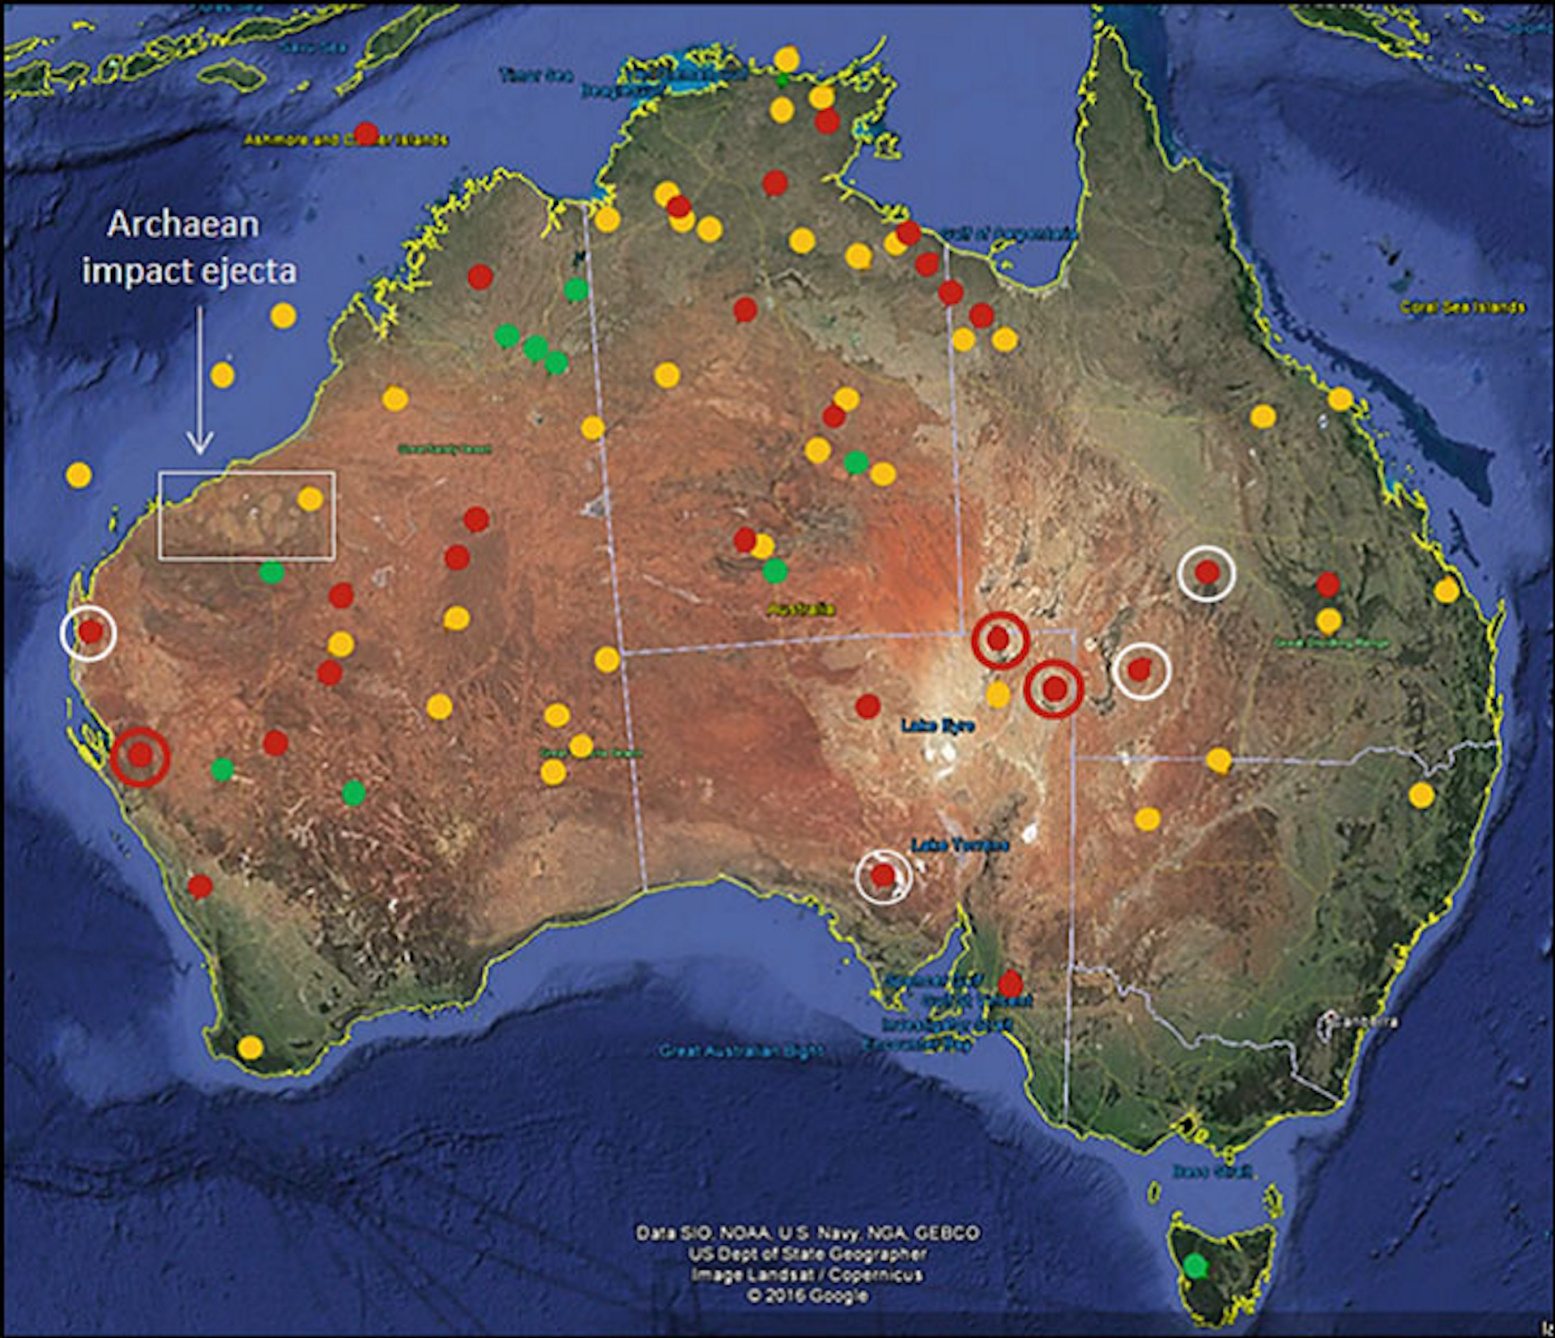 This map shows the distribution of circular structures of uncertain, possible or probable impact origin on the Australian continent and offshore. Green dots represent confirmed impact craters. Red dots represent confirmed impact structures that are more than 100km wide, whereas red dots inside white circles are more than 50km wide. Yellow dots represent likely impact structures.